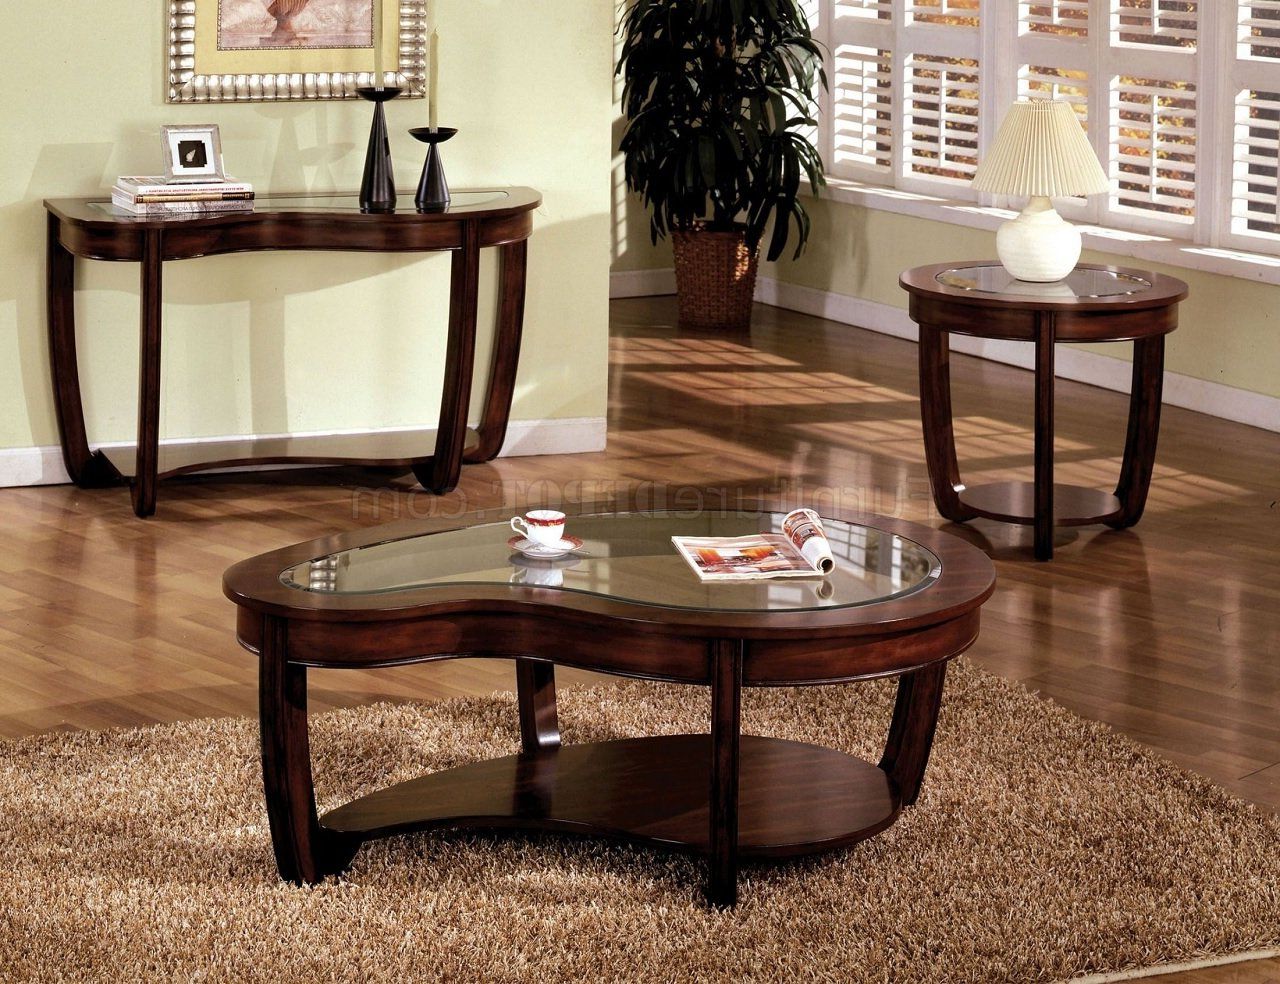 Preferred Dark Coffee Bean Console Tables Pertaining To Crystal Falls Coffee & 2 End Tables Set Cm4336 In Dark Cherry (View 5 of 10)